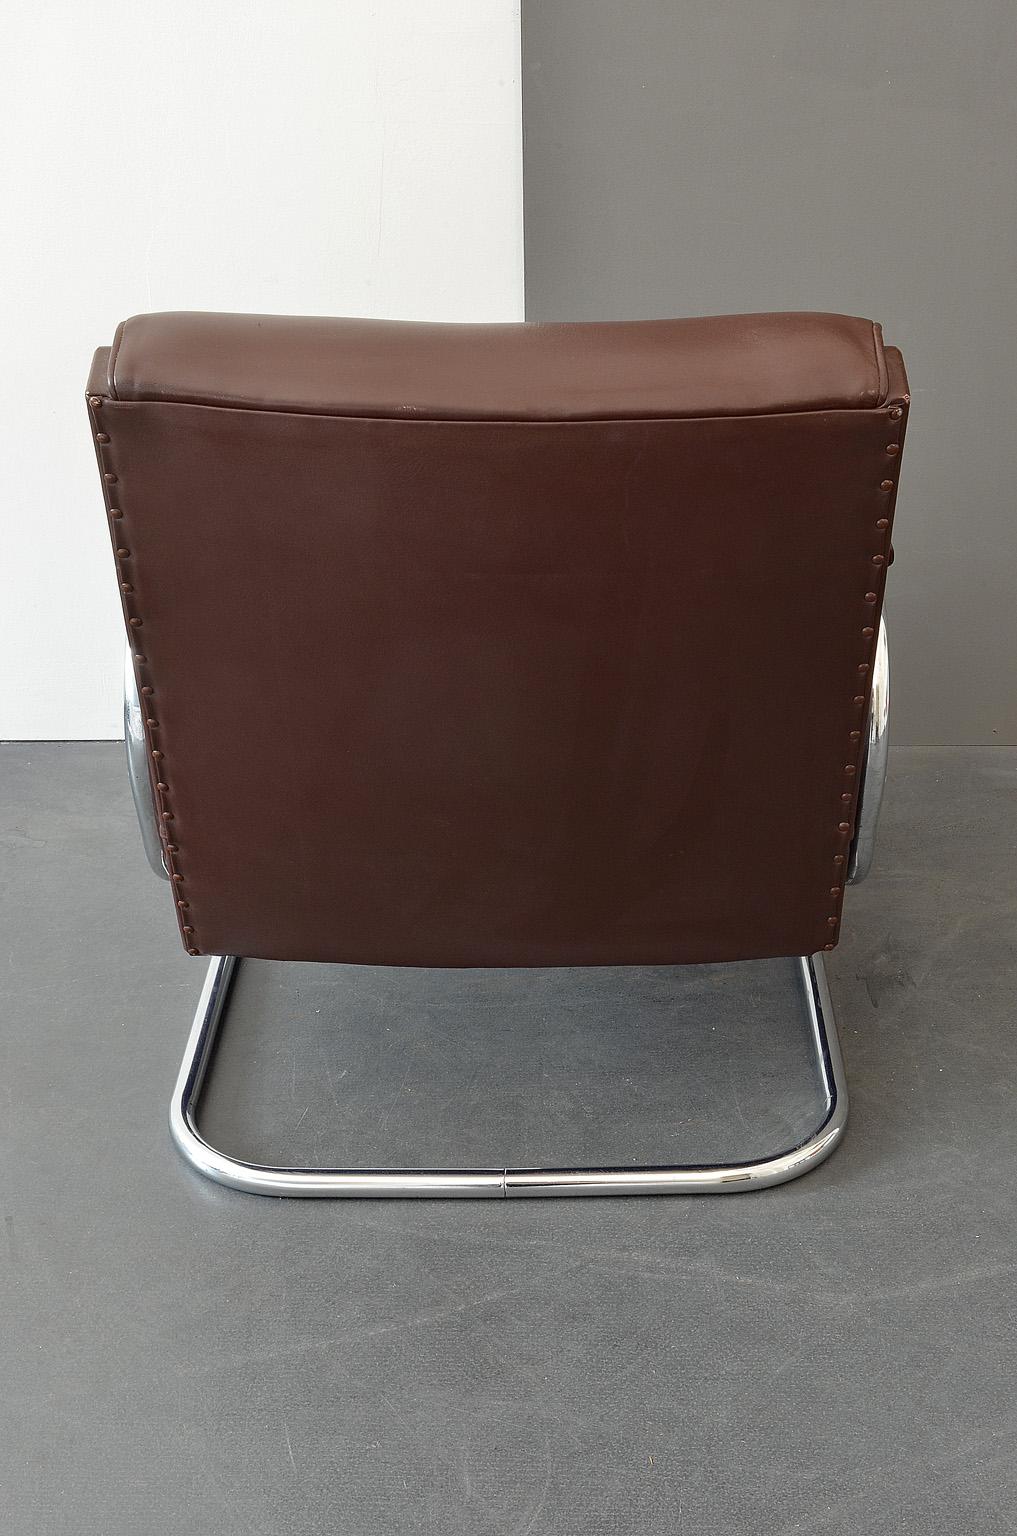 Czech Armchair / Cantilever Tubular Steel Brown Leather from Mücke Melder, 1930s For Sale